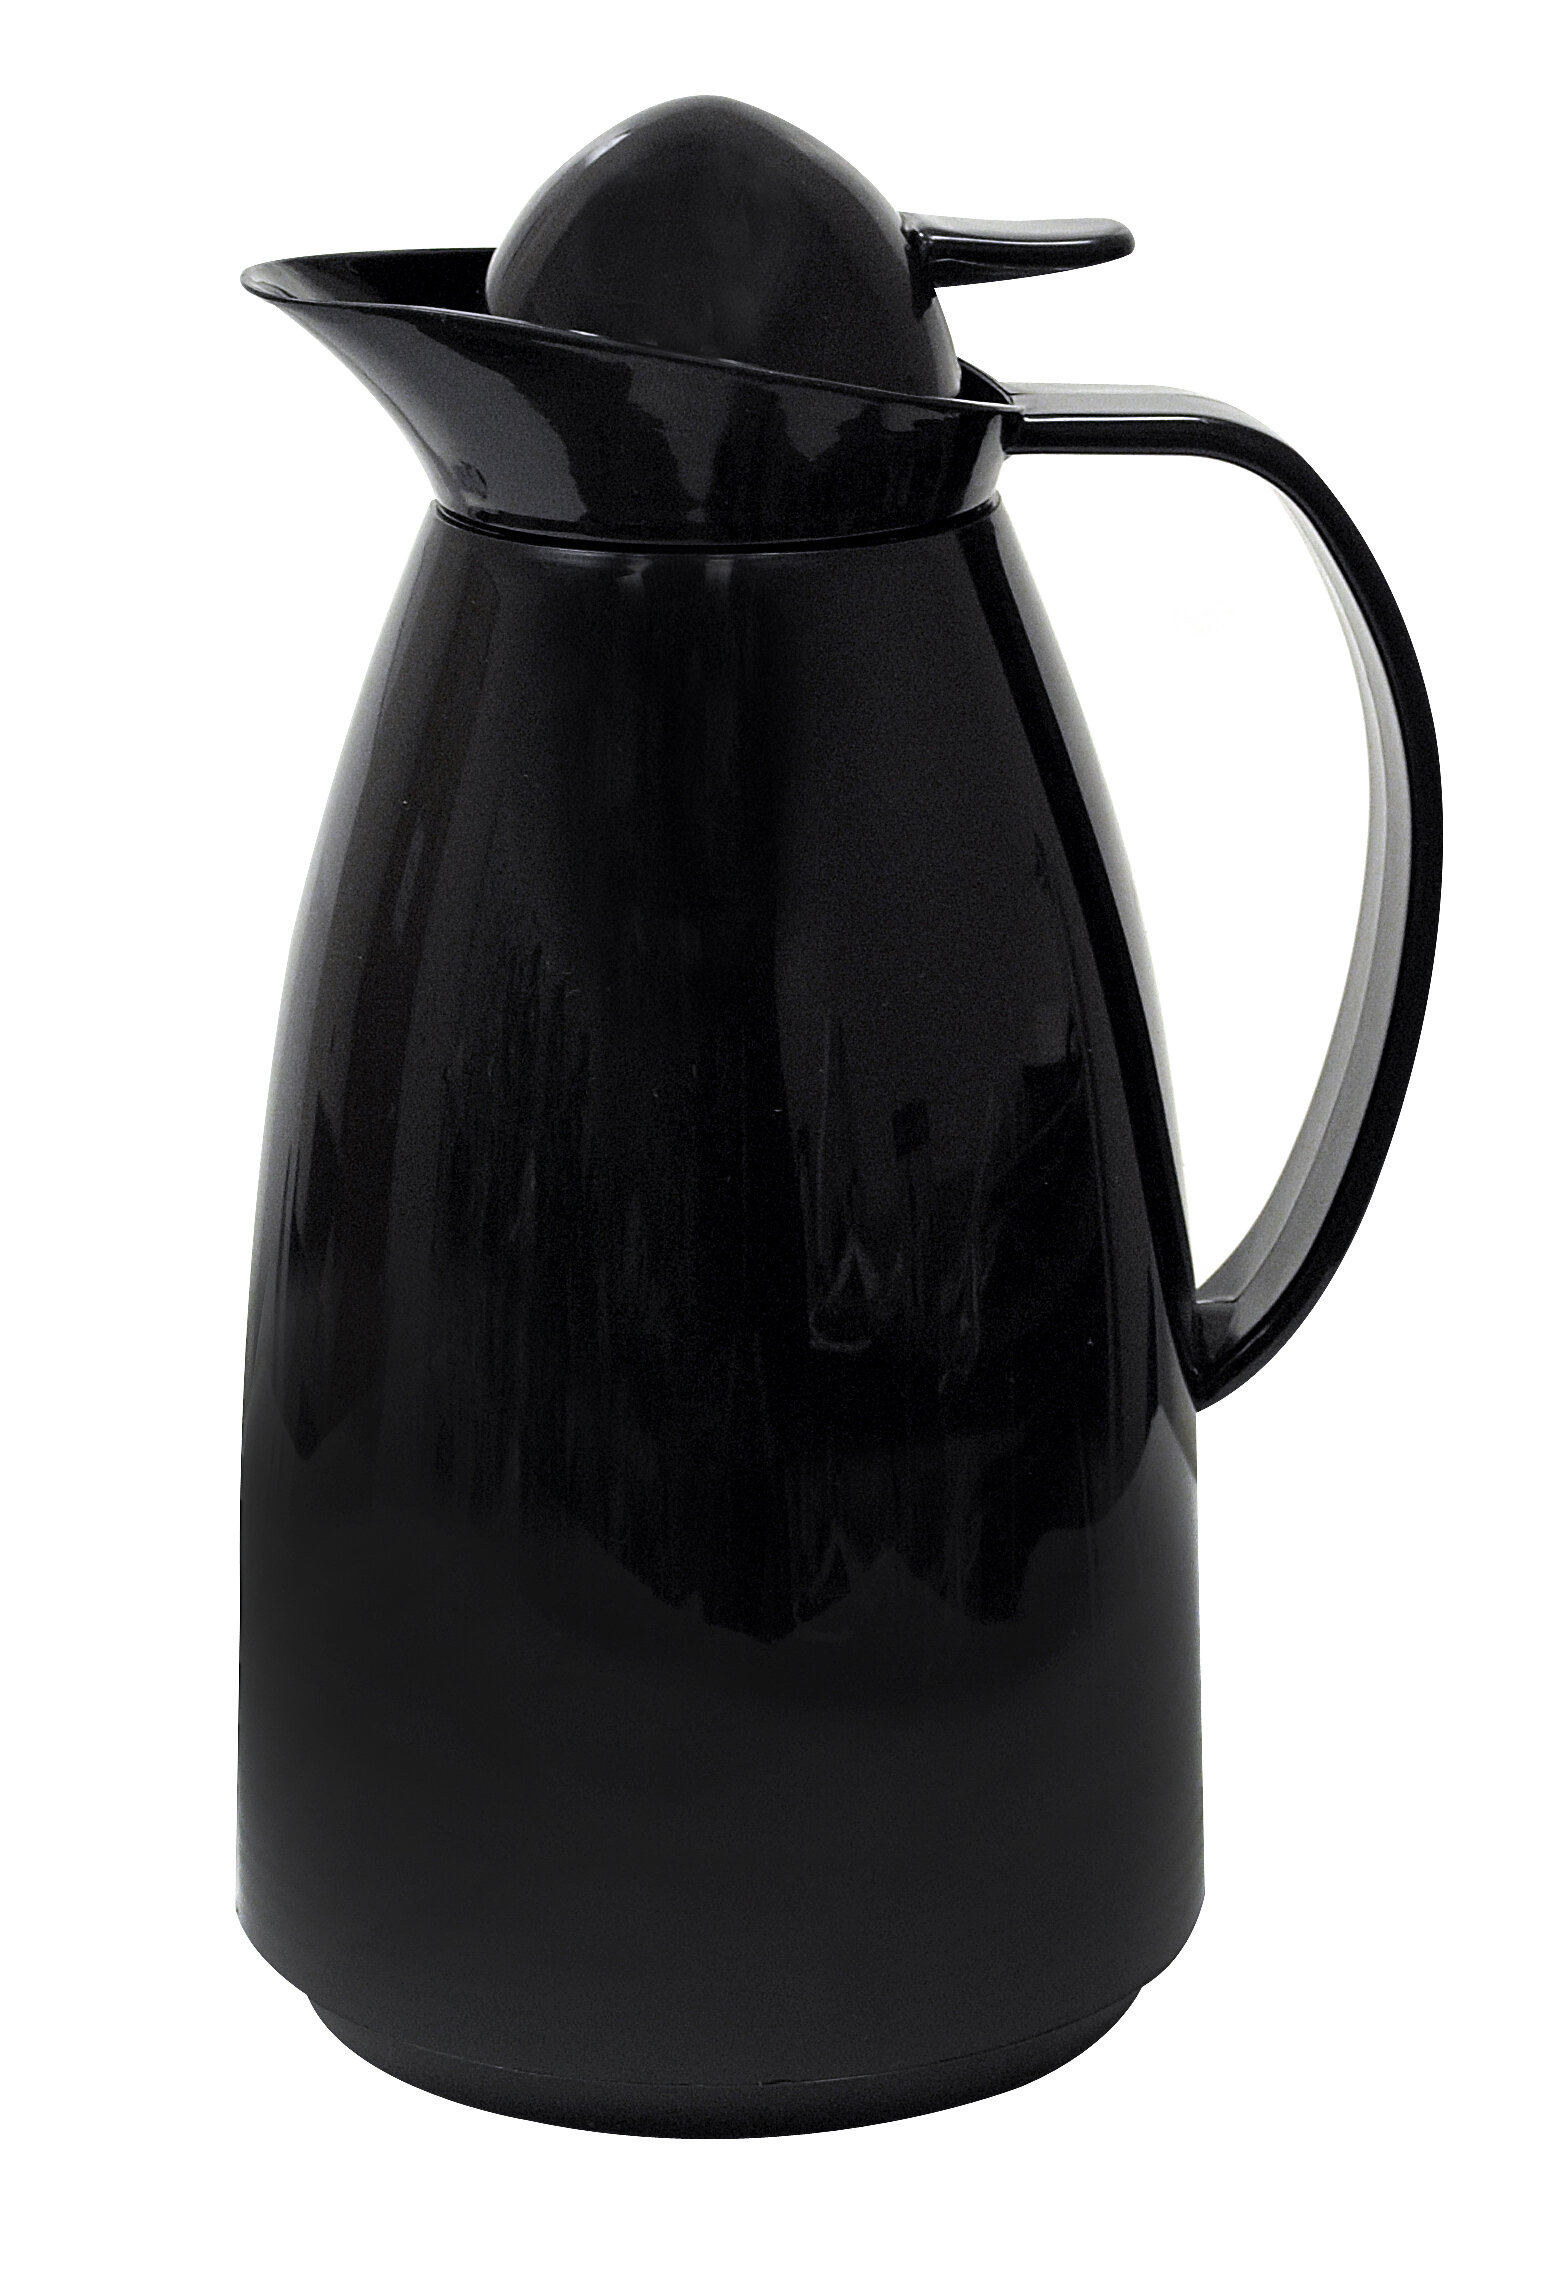 SALE: 20 oz. Glass-Lined Thermal Carafe Keeps Contents Hot/Cold